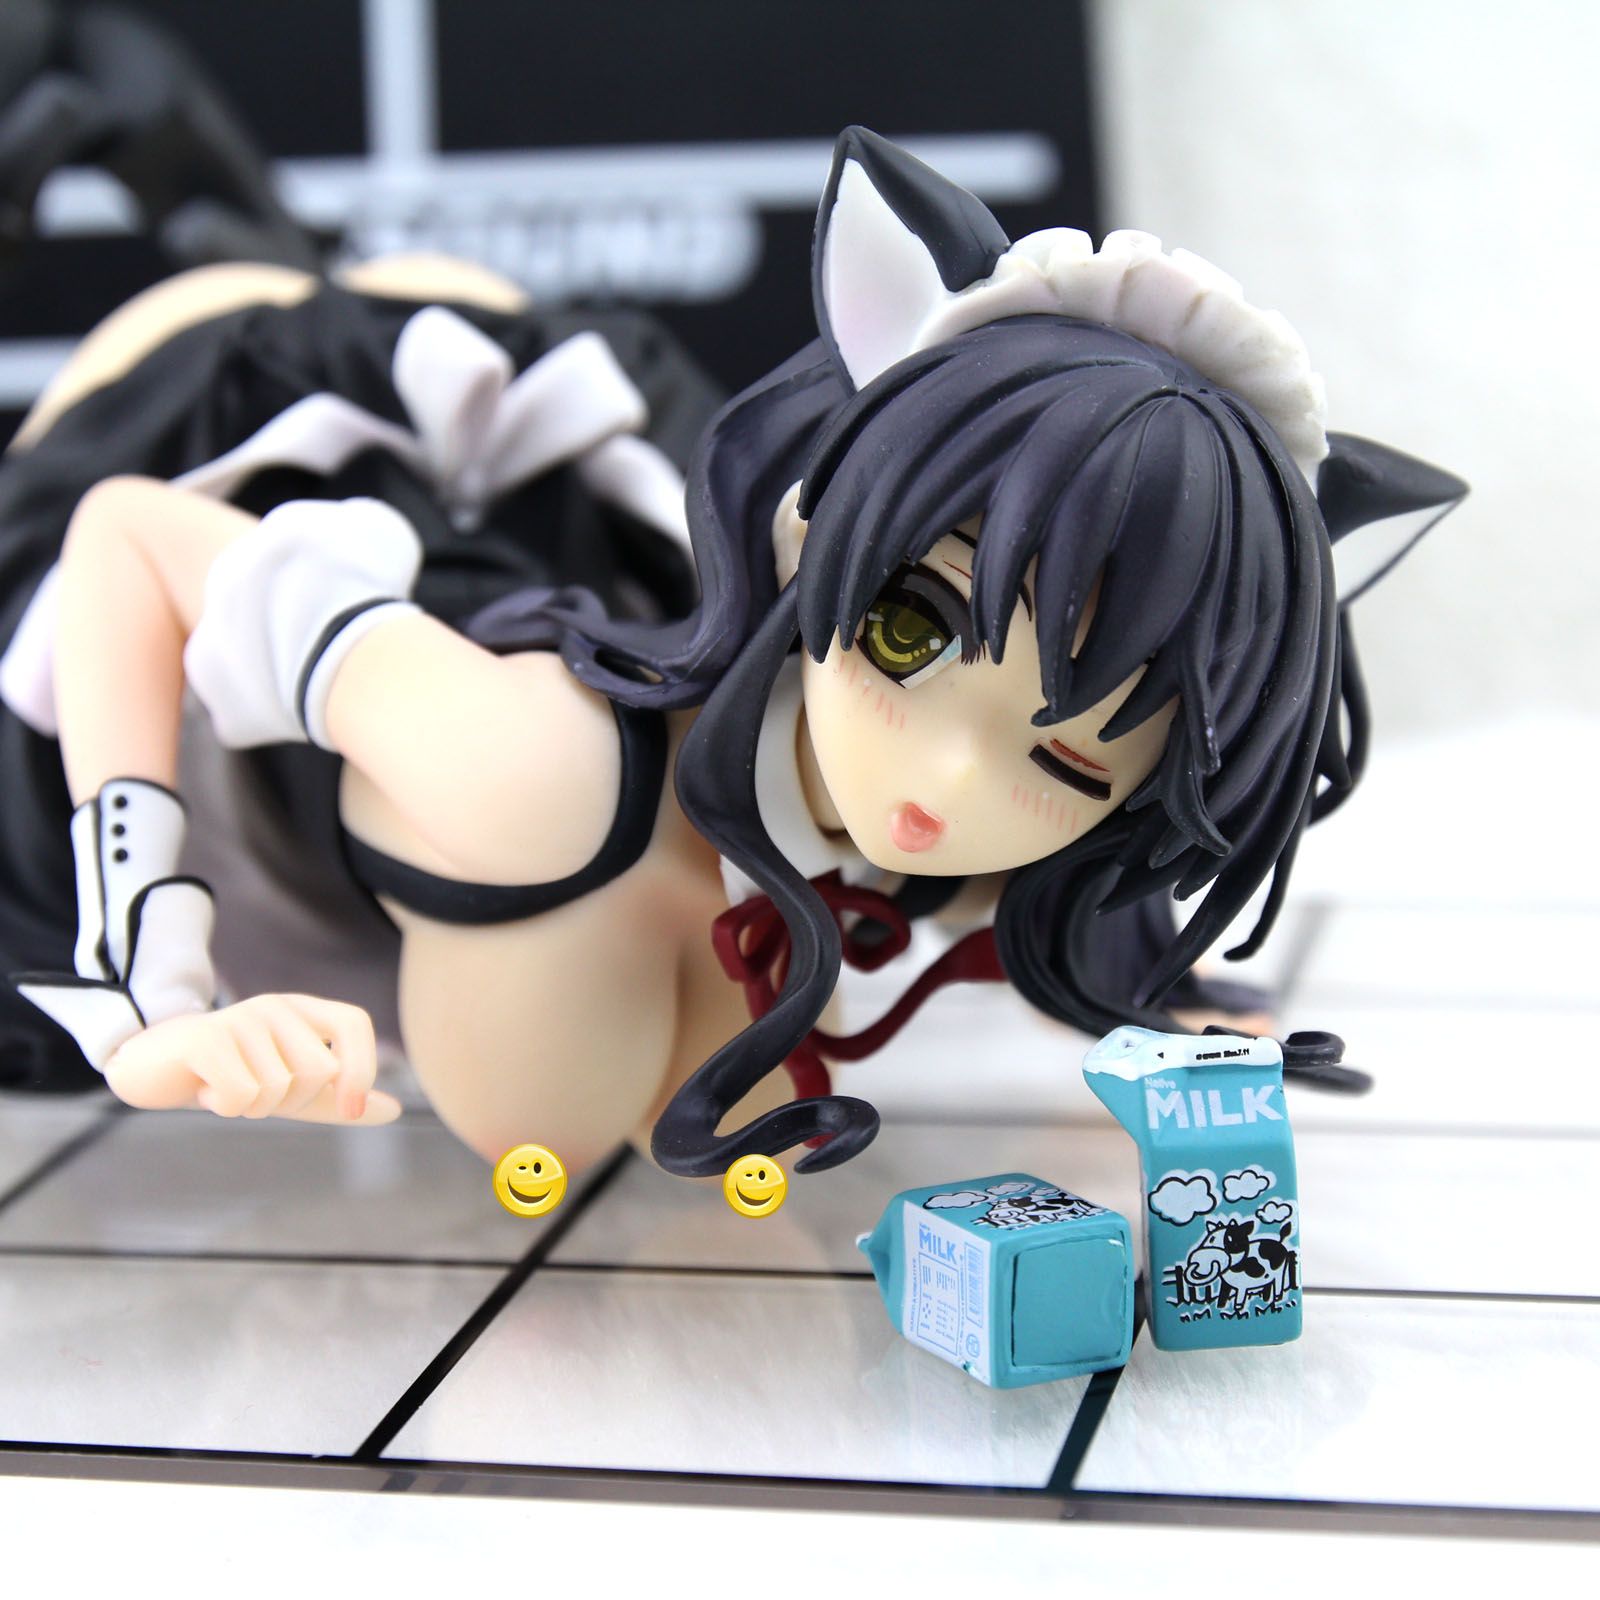 Anime Sexy Army Girls - Native Cat Lap Milk Sexy Maid Sexy Girls Anime Resin Figures Rare Editions  Nude Misaki Kurehito Action Figure Anime Sex Doll Toy Army Figures Toy Army  ...